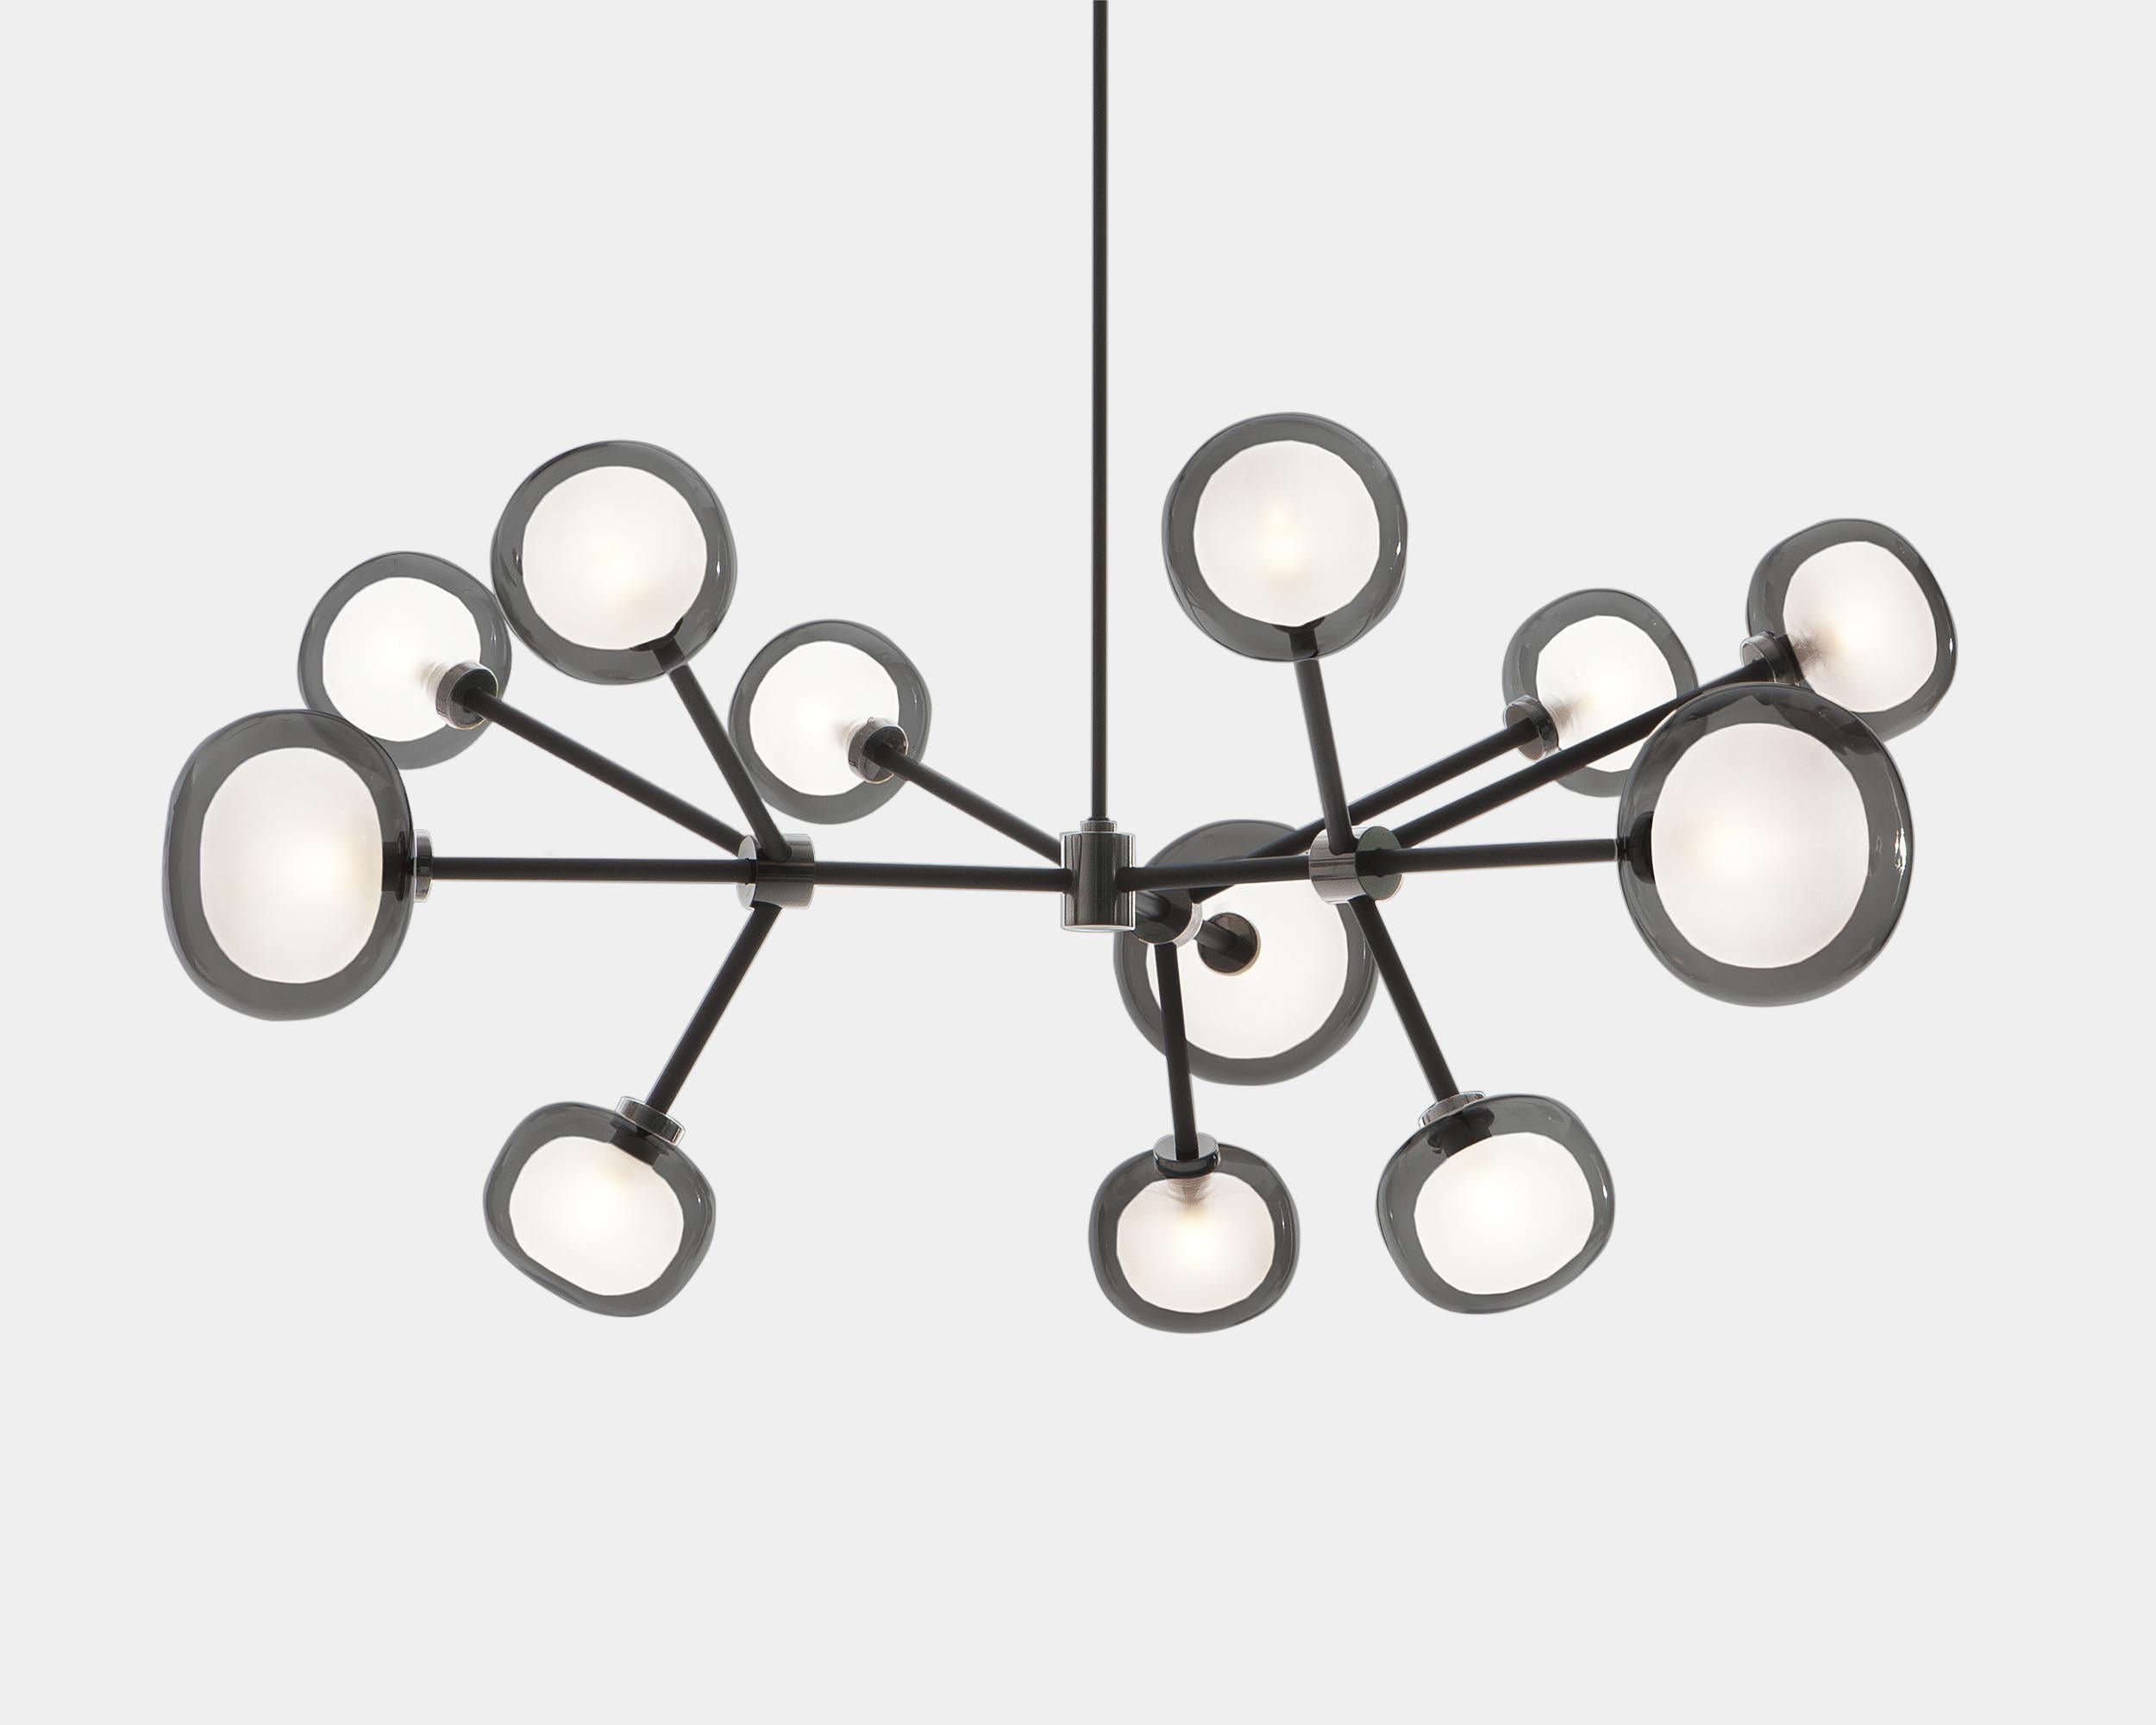 Chandelier Nabila 552.10 by Corrado Dotti x TOOY
12 lights
UL Listed Compliant with US electric system


Model shown: C2 + C41 + clear
Finish: Brushed brass
Color: Smoke glass
Canopy: Ø 13 cm

Lighting source : 12 x G9 220/240V

Pendant: Cable